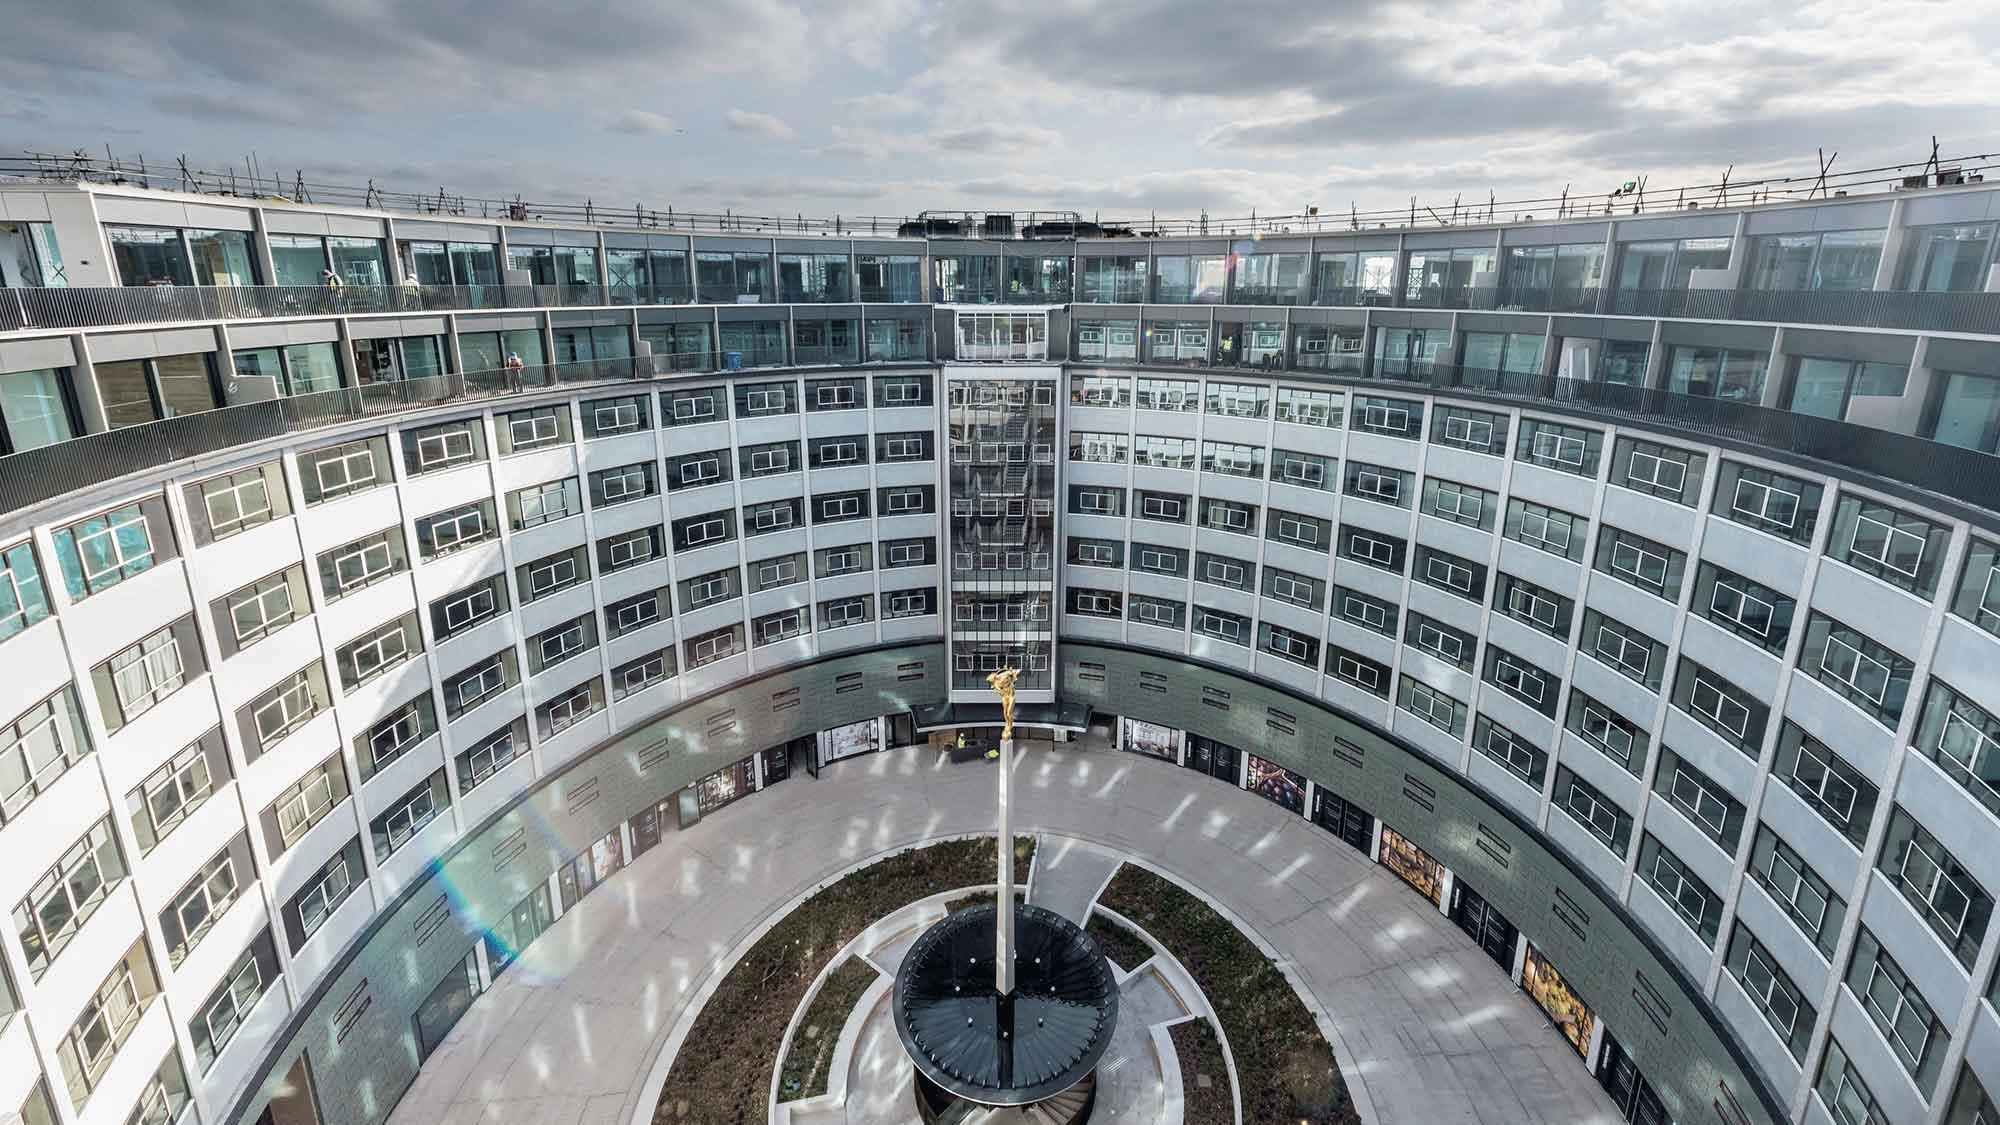 Where Is The Bbc Television Centre In London